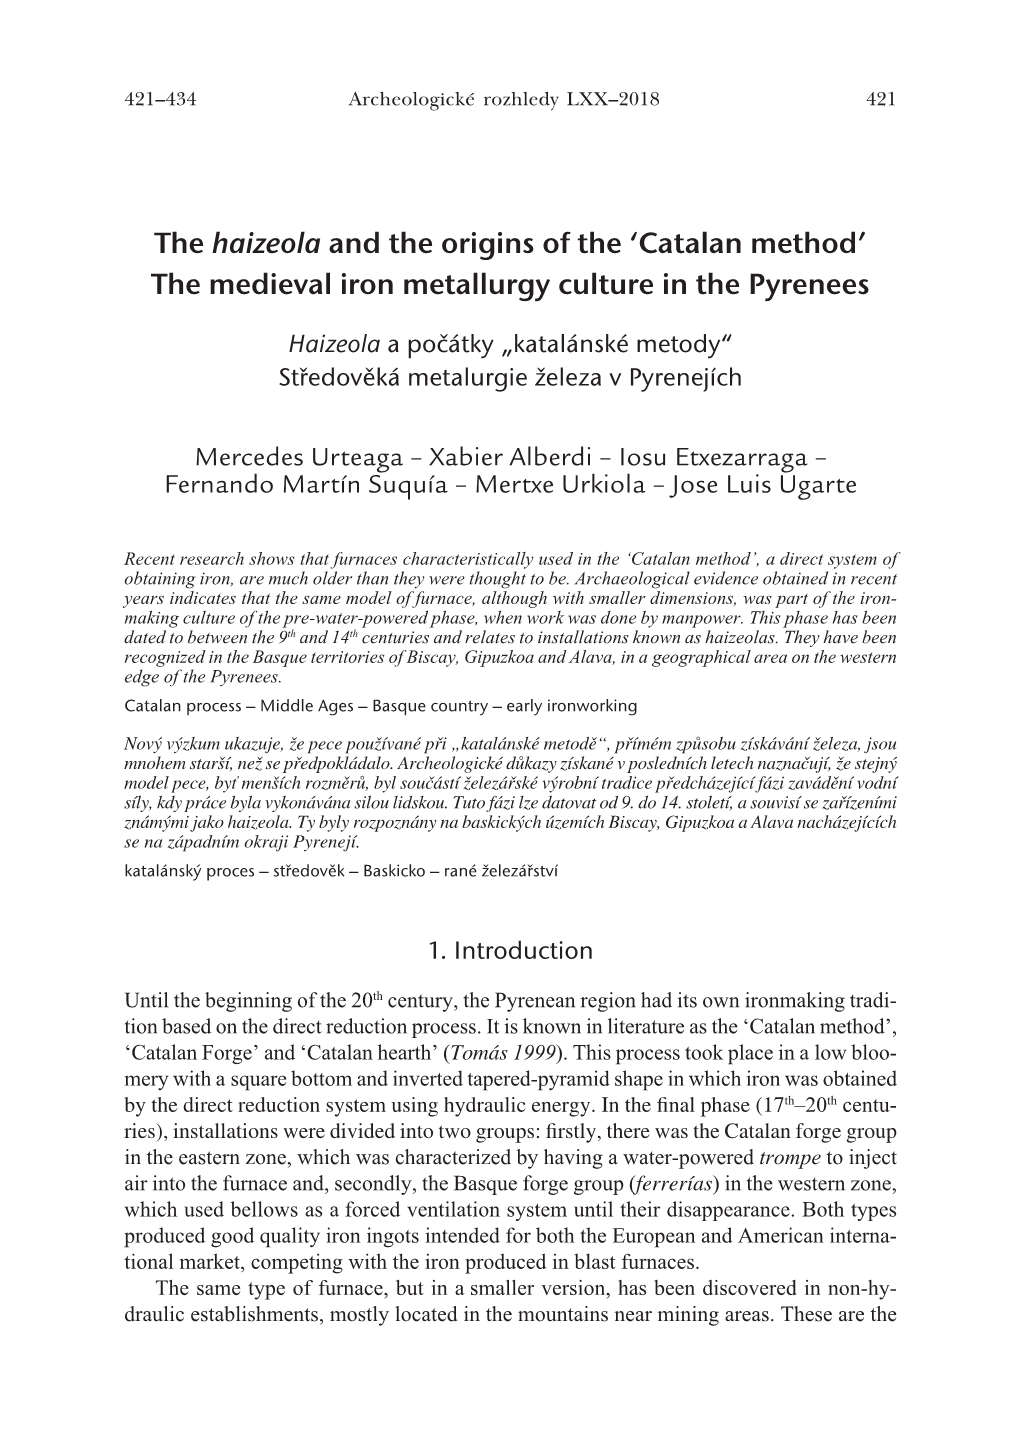 The Haizeola and the Origins of the 'Catalan Method' the Medieval Iron